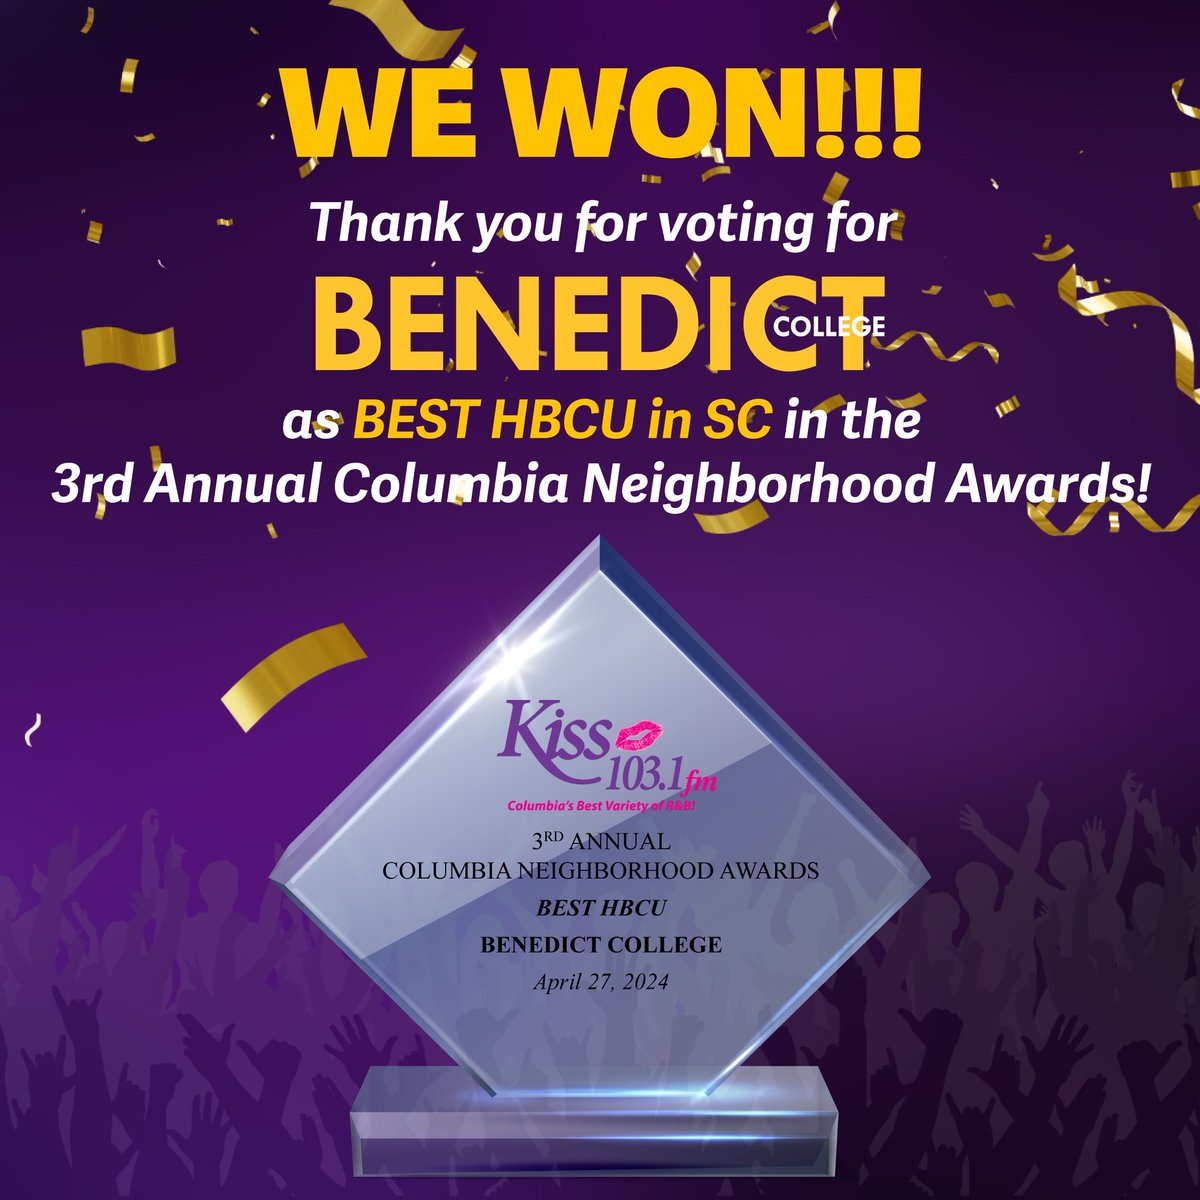 Thank you for voting for Benedict College in the Columbia Neighborhood Awards!